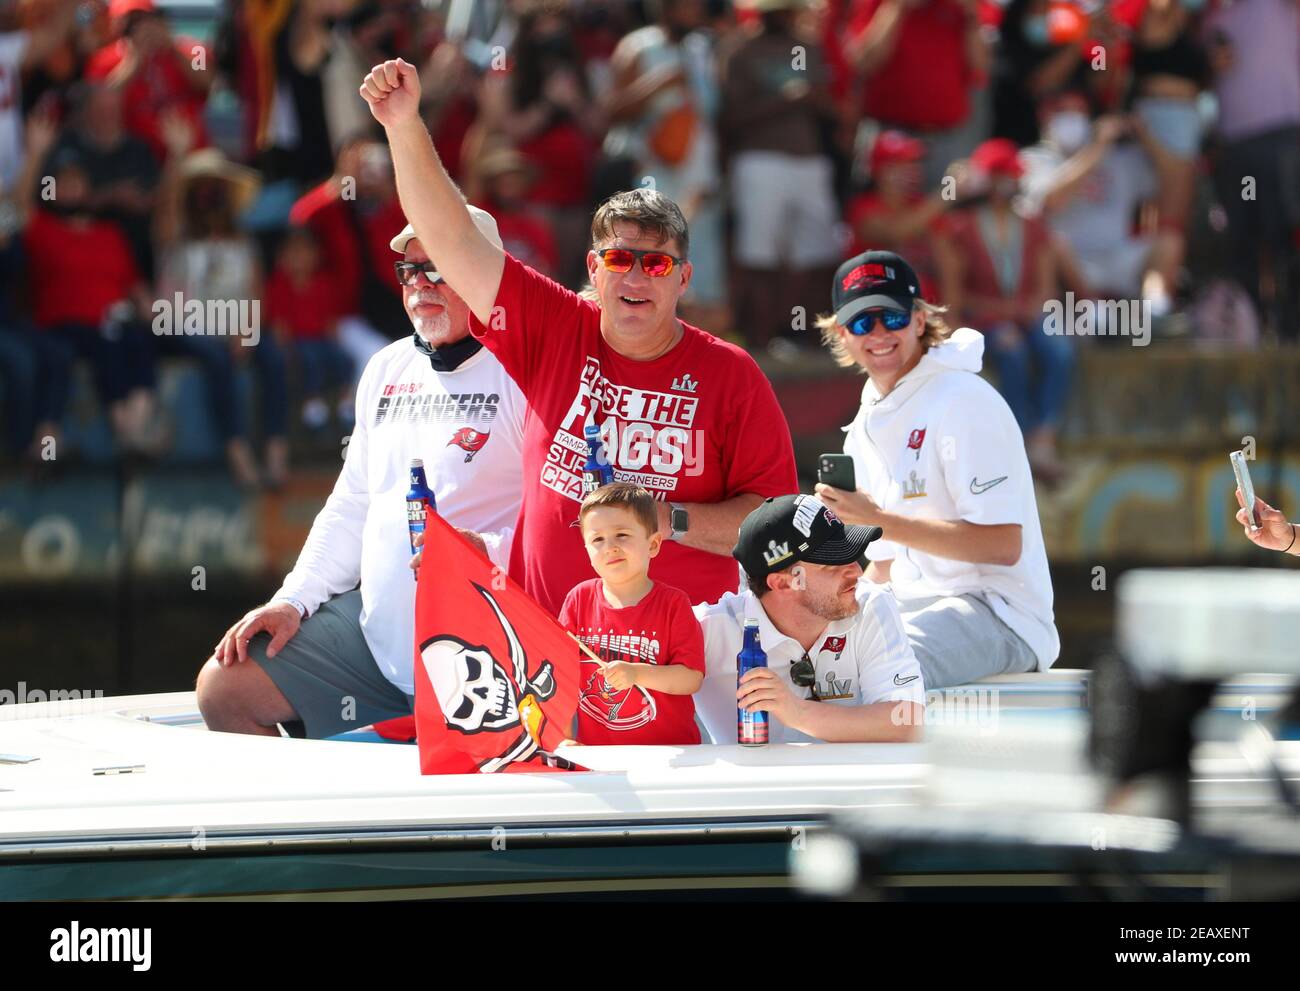 February 10, 2021, Tampa, FL, USA; Tampa Bay Bucaneers GM Jason Licht smiles and poses for a photo during the Super Bowl 55 Champion Buccaneers boat p Stock Photo